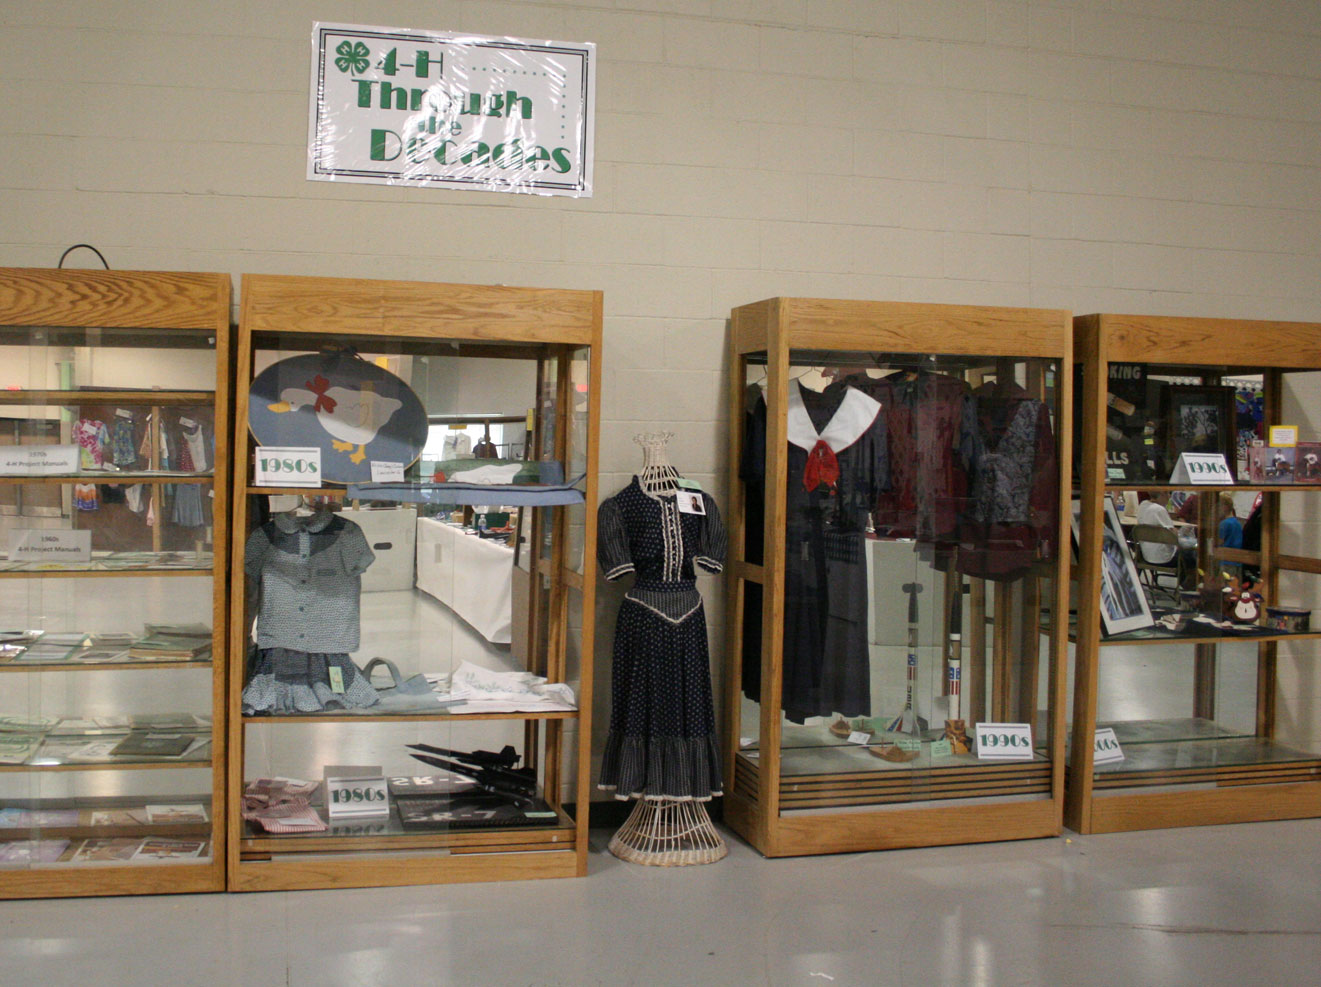 Last year was the first time a "4-H Through the Decades" exhibit was on display at the Lancaster County Super Fair.